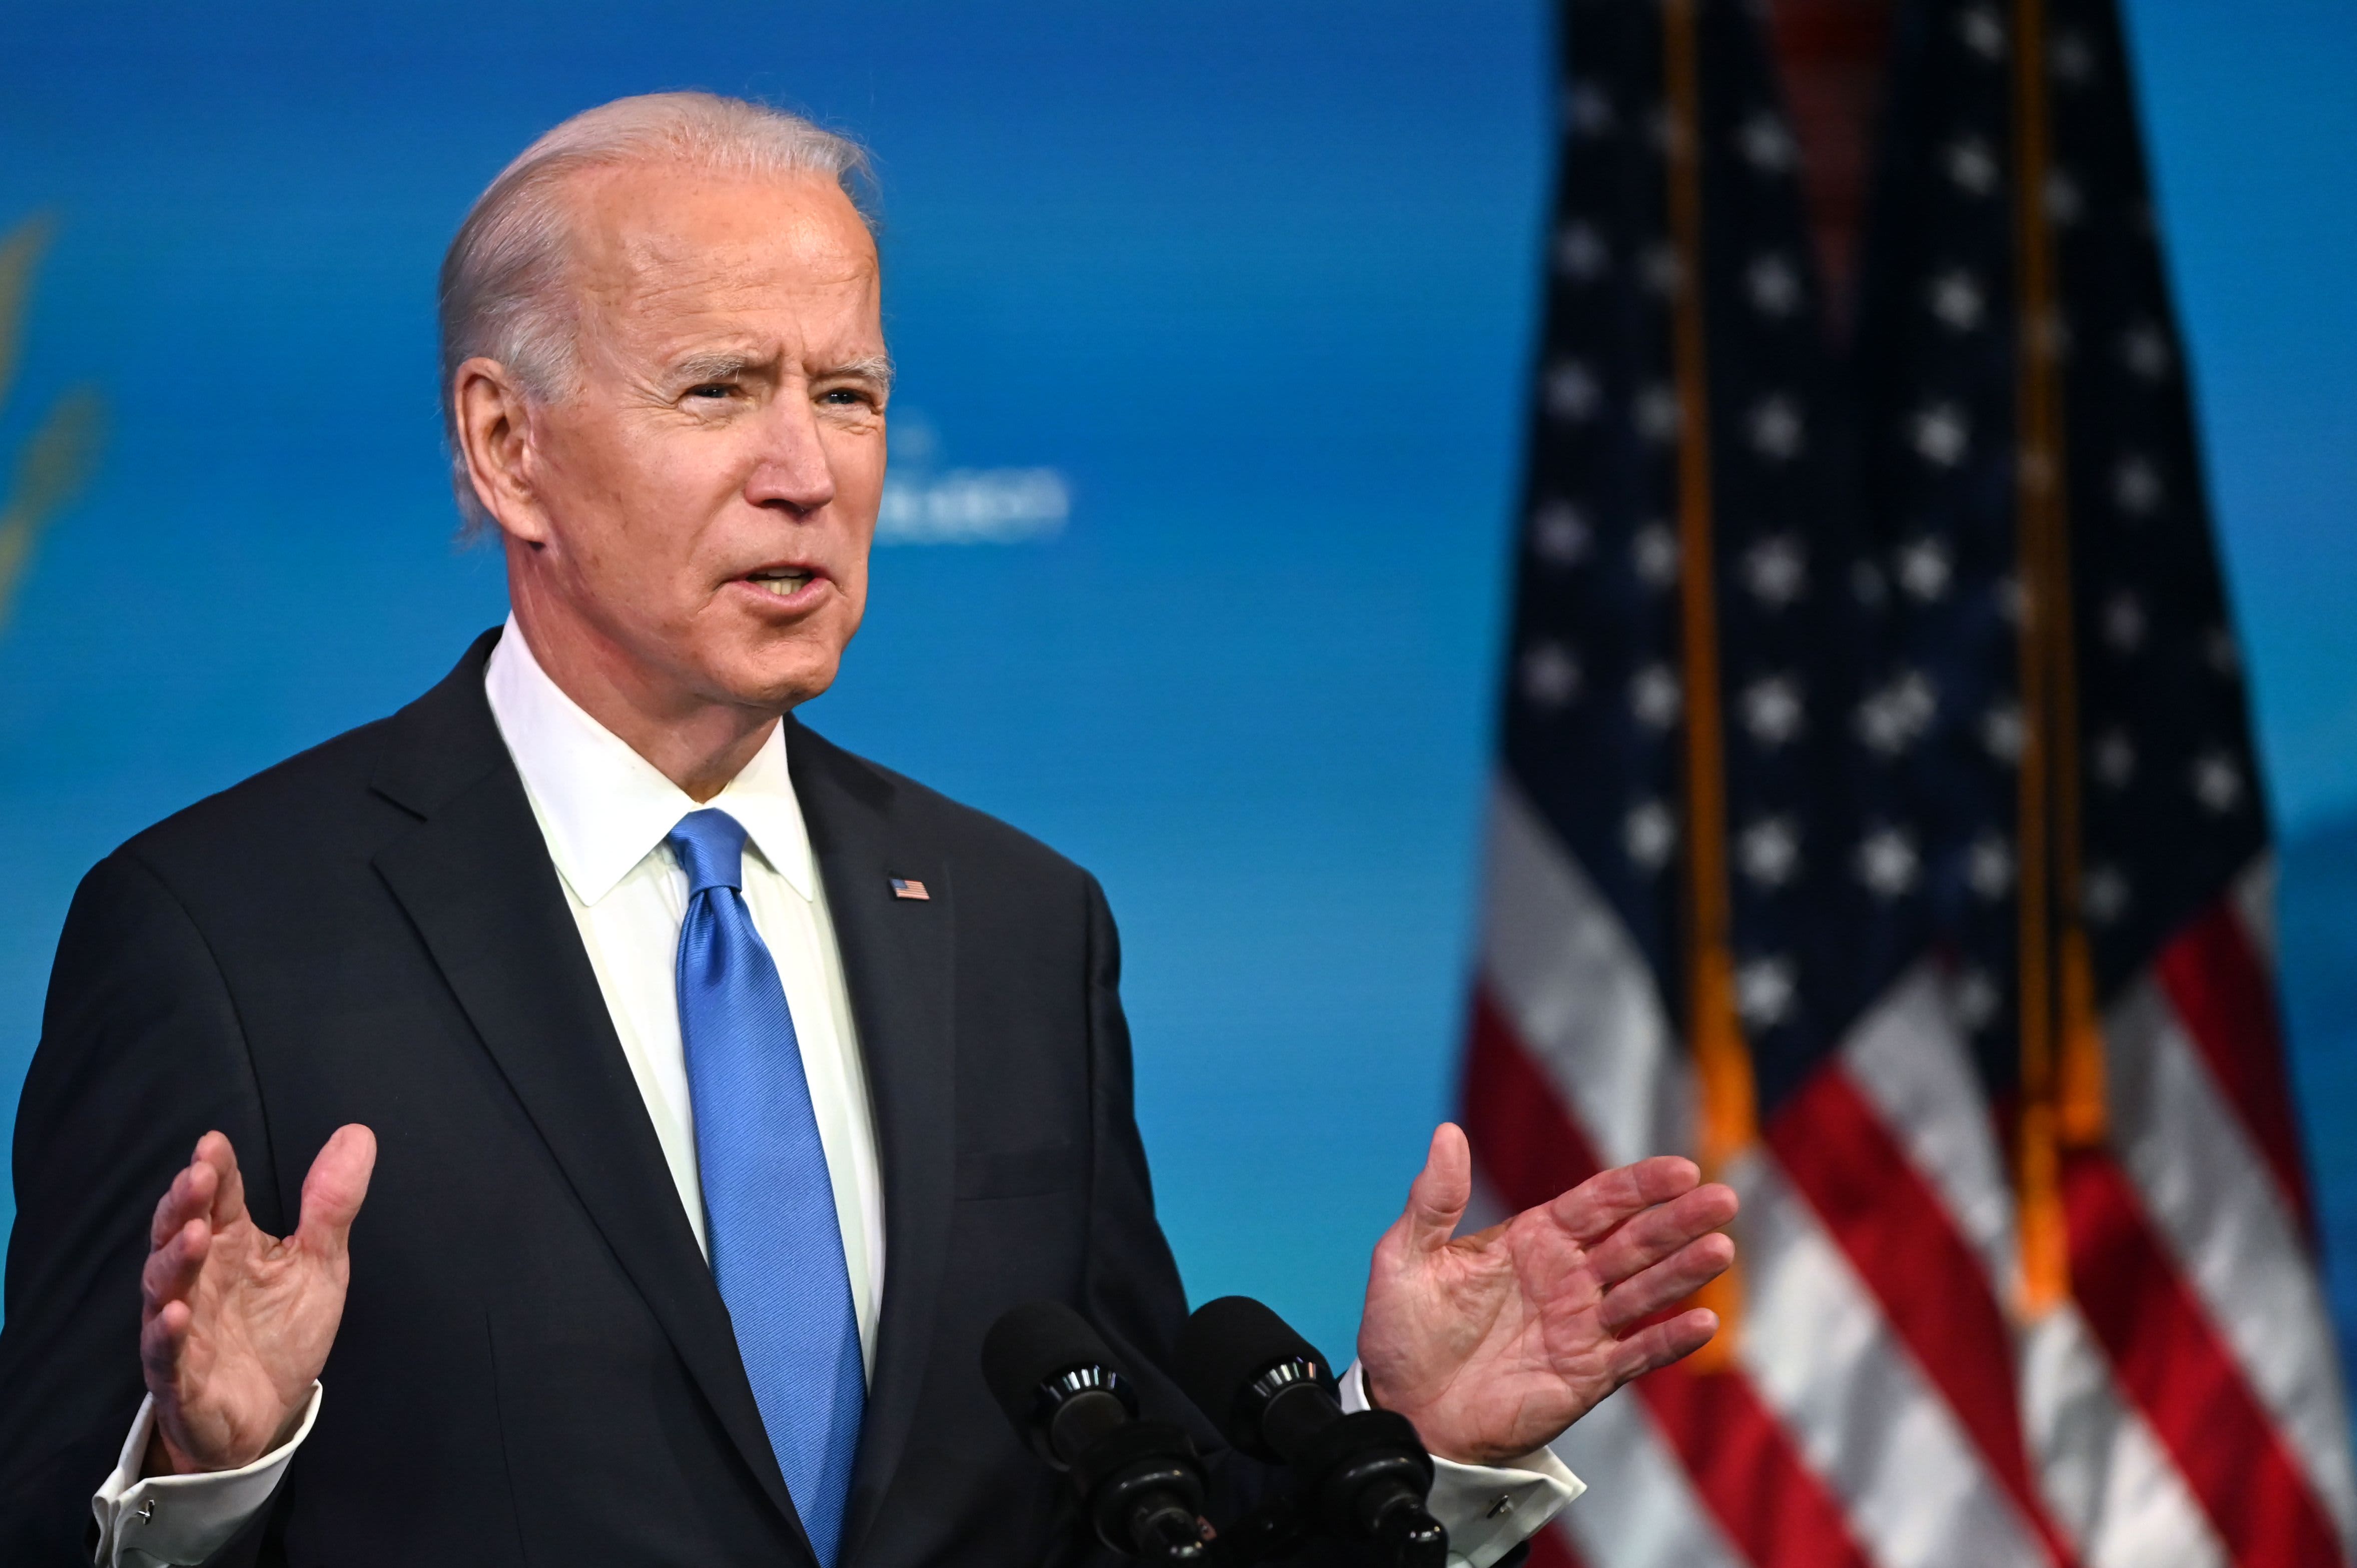 How Biden will approach the US battle with China over technology